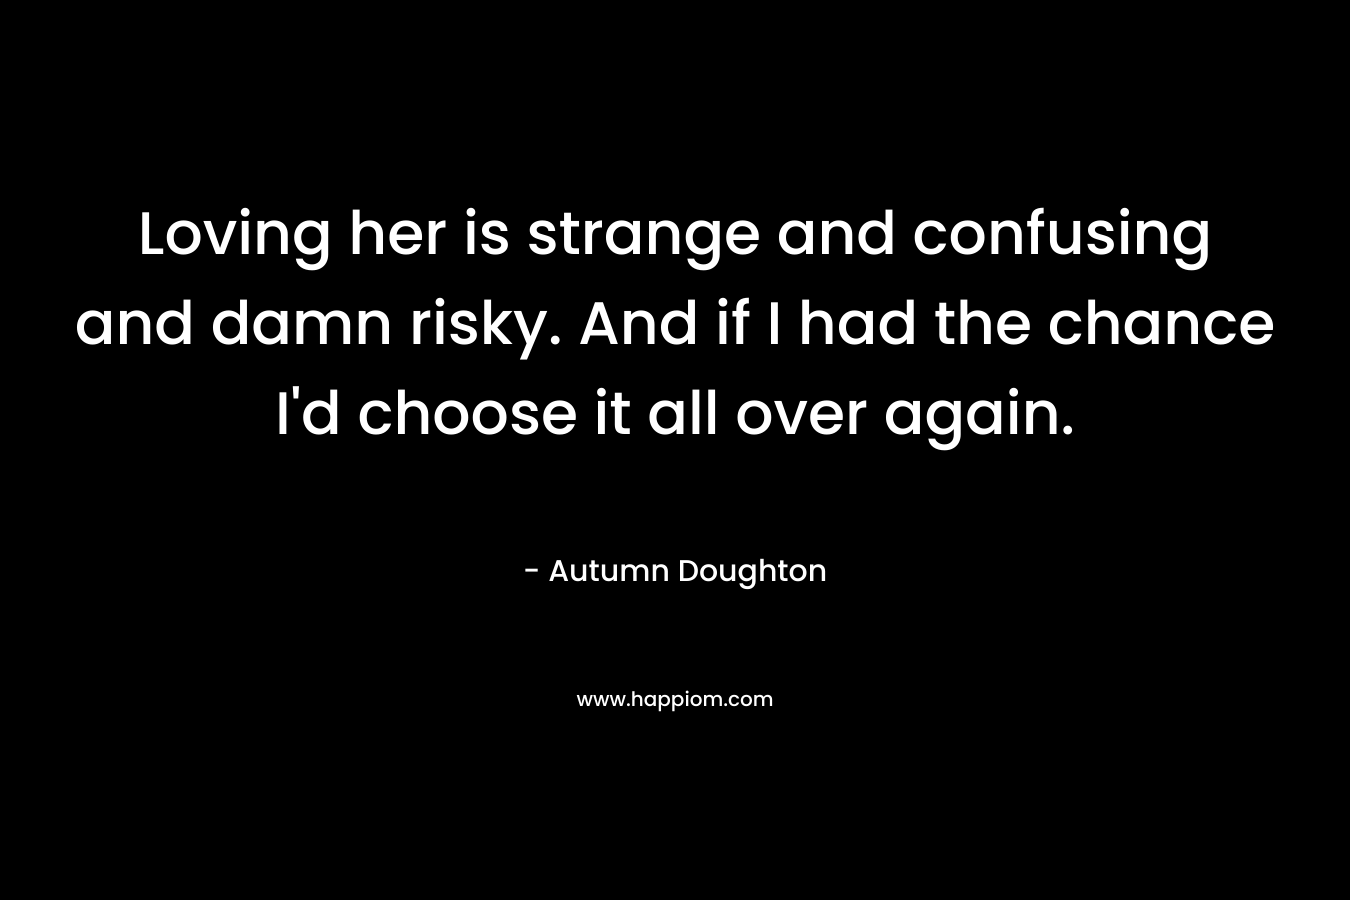 Loving her is strange and confusing and damn risky. And if I had the chance I’d choose it all over again. – Autumn Doughton